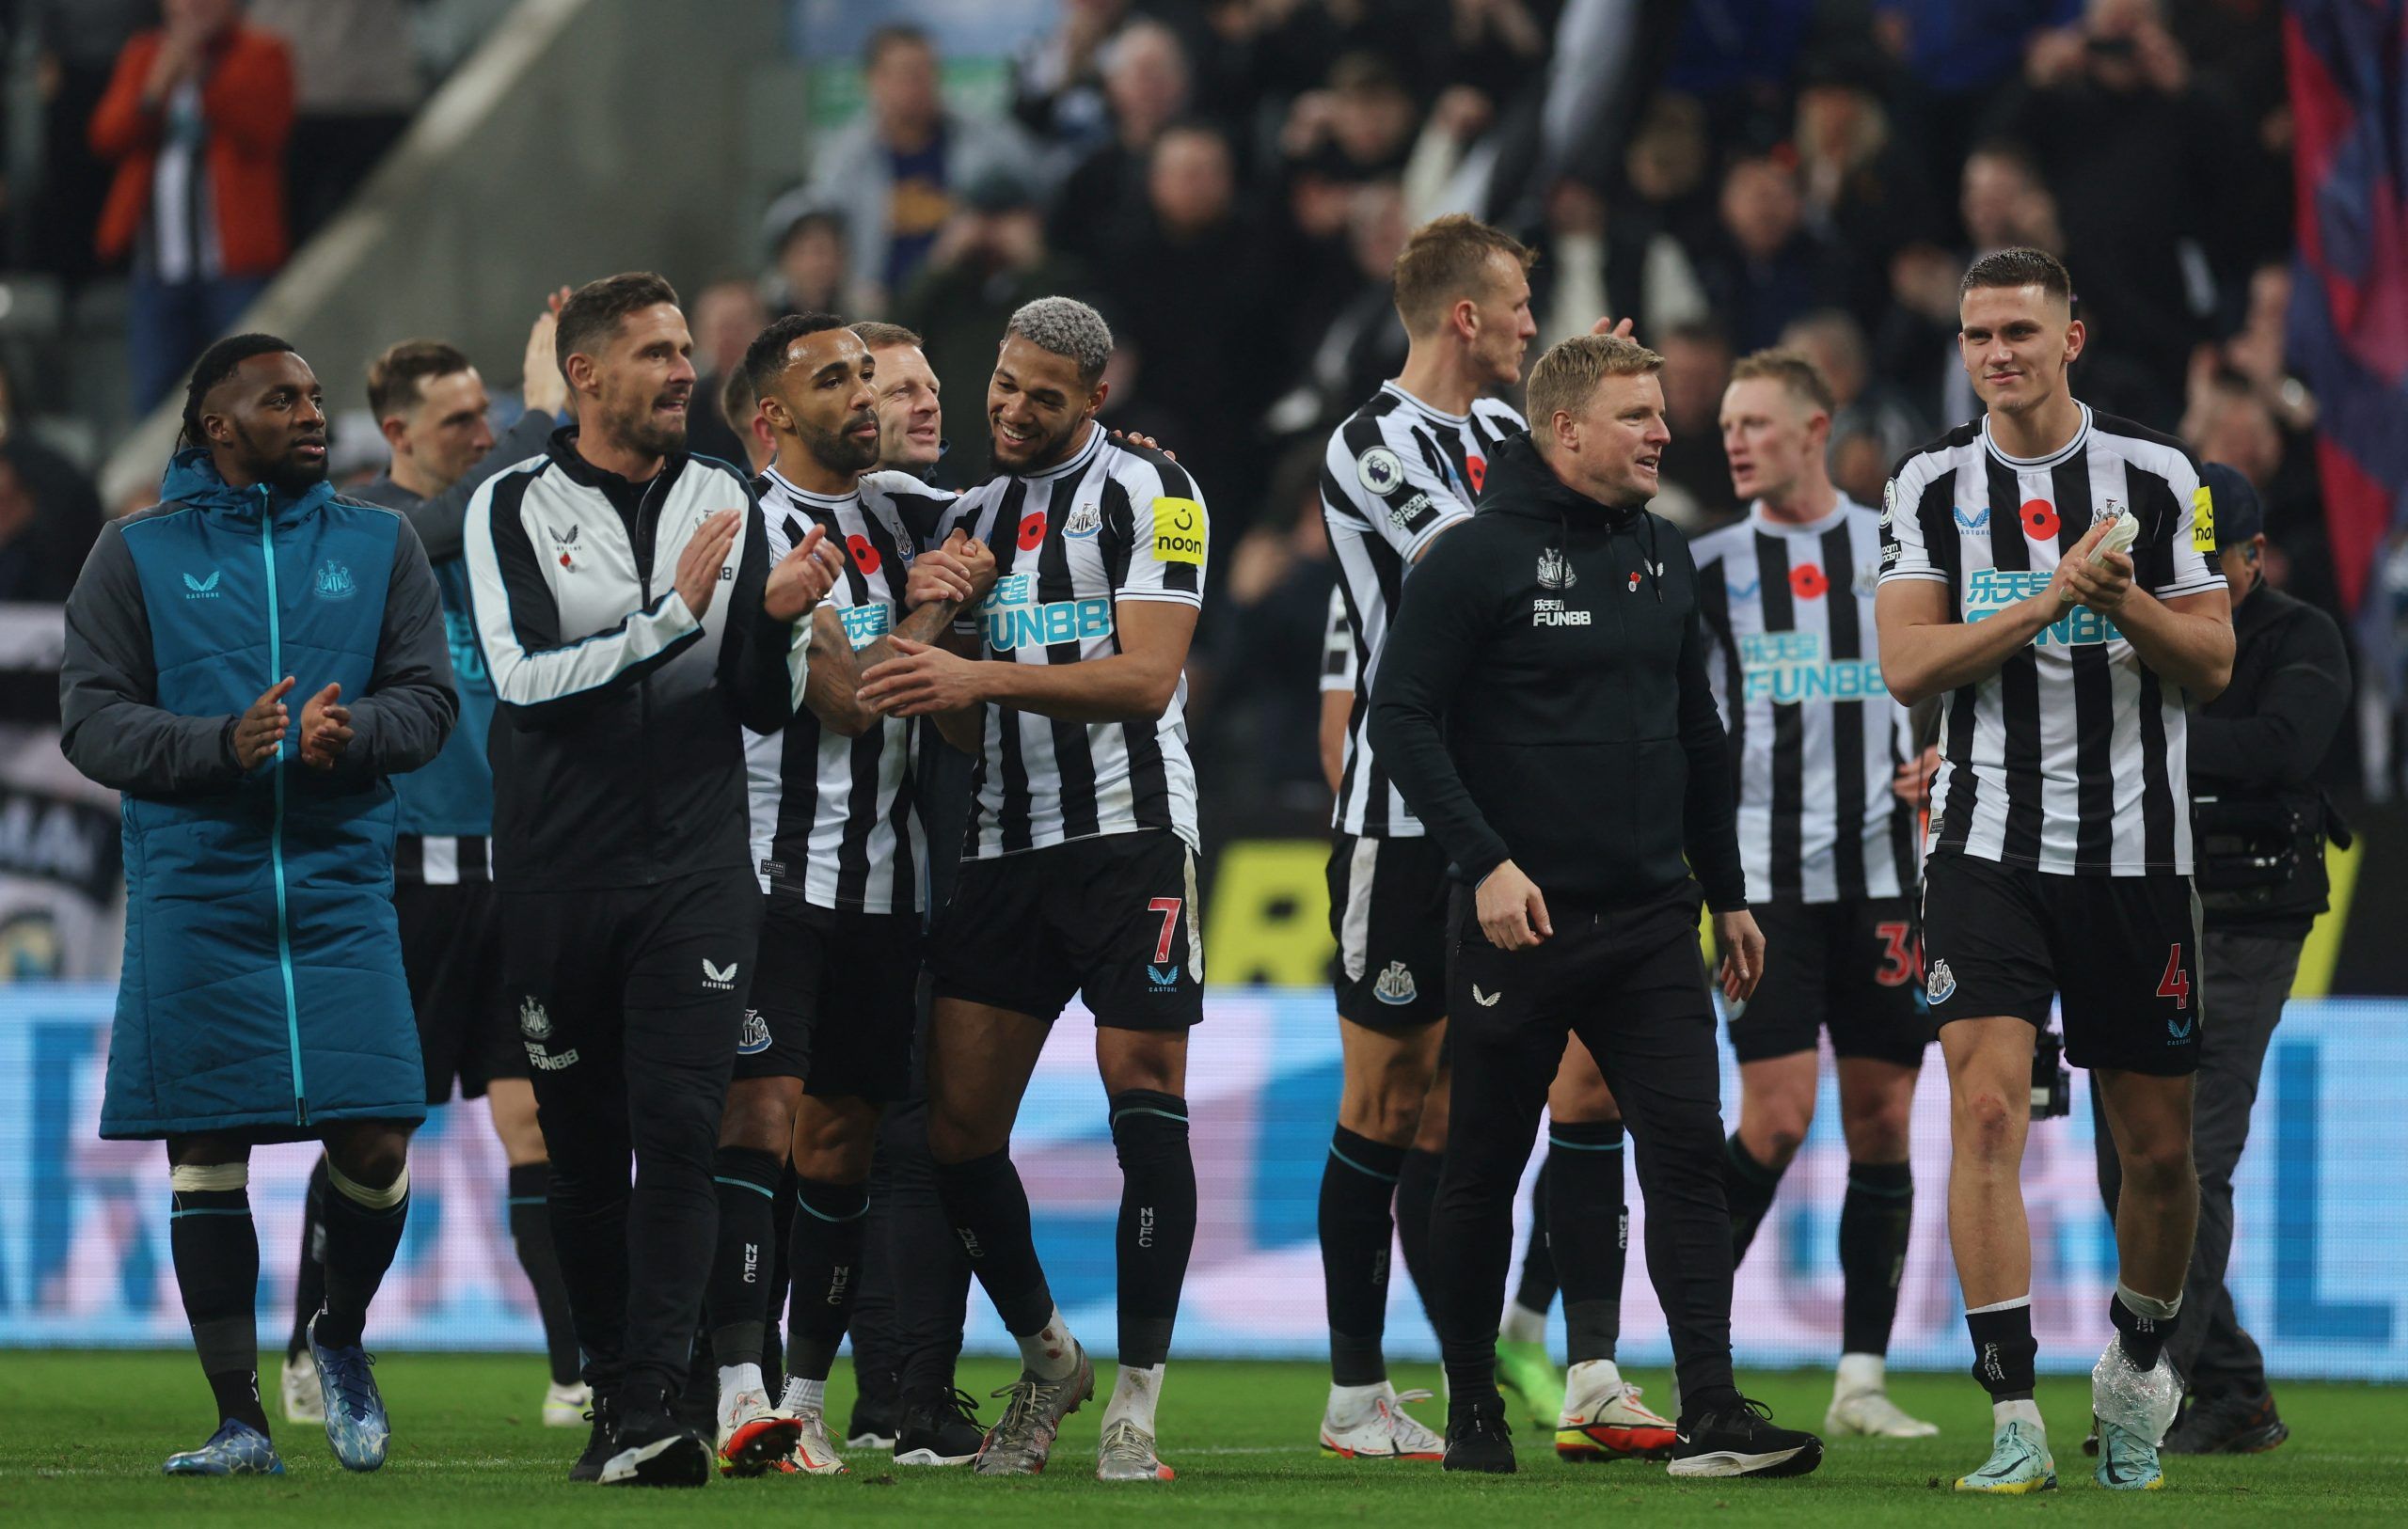 Soccer Football - Premier League - Newcastle United v Chelsea - St James' Park, Newcastle, Britain - November 12, 2022 Newcastle United manager Eddie Howe and players celebrate after the match Action Images via Reuters/Lee Smith EDITORIAL USE ONLY. No use with unauthorized audio, video, data, fixture lists, club/league logos or 'live' services. Online in-match use limited to 75 images, no video emulation. No use in betting, games or single club /league/player publications.  Please contact your a